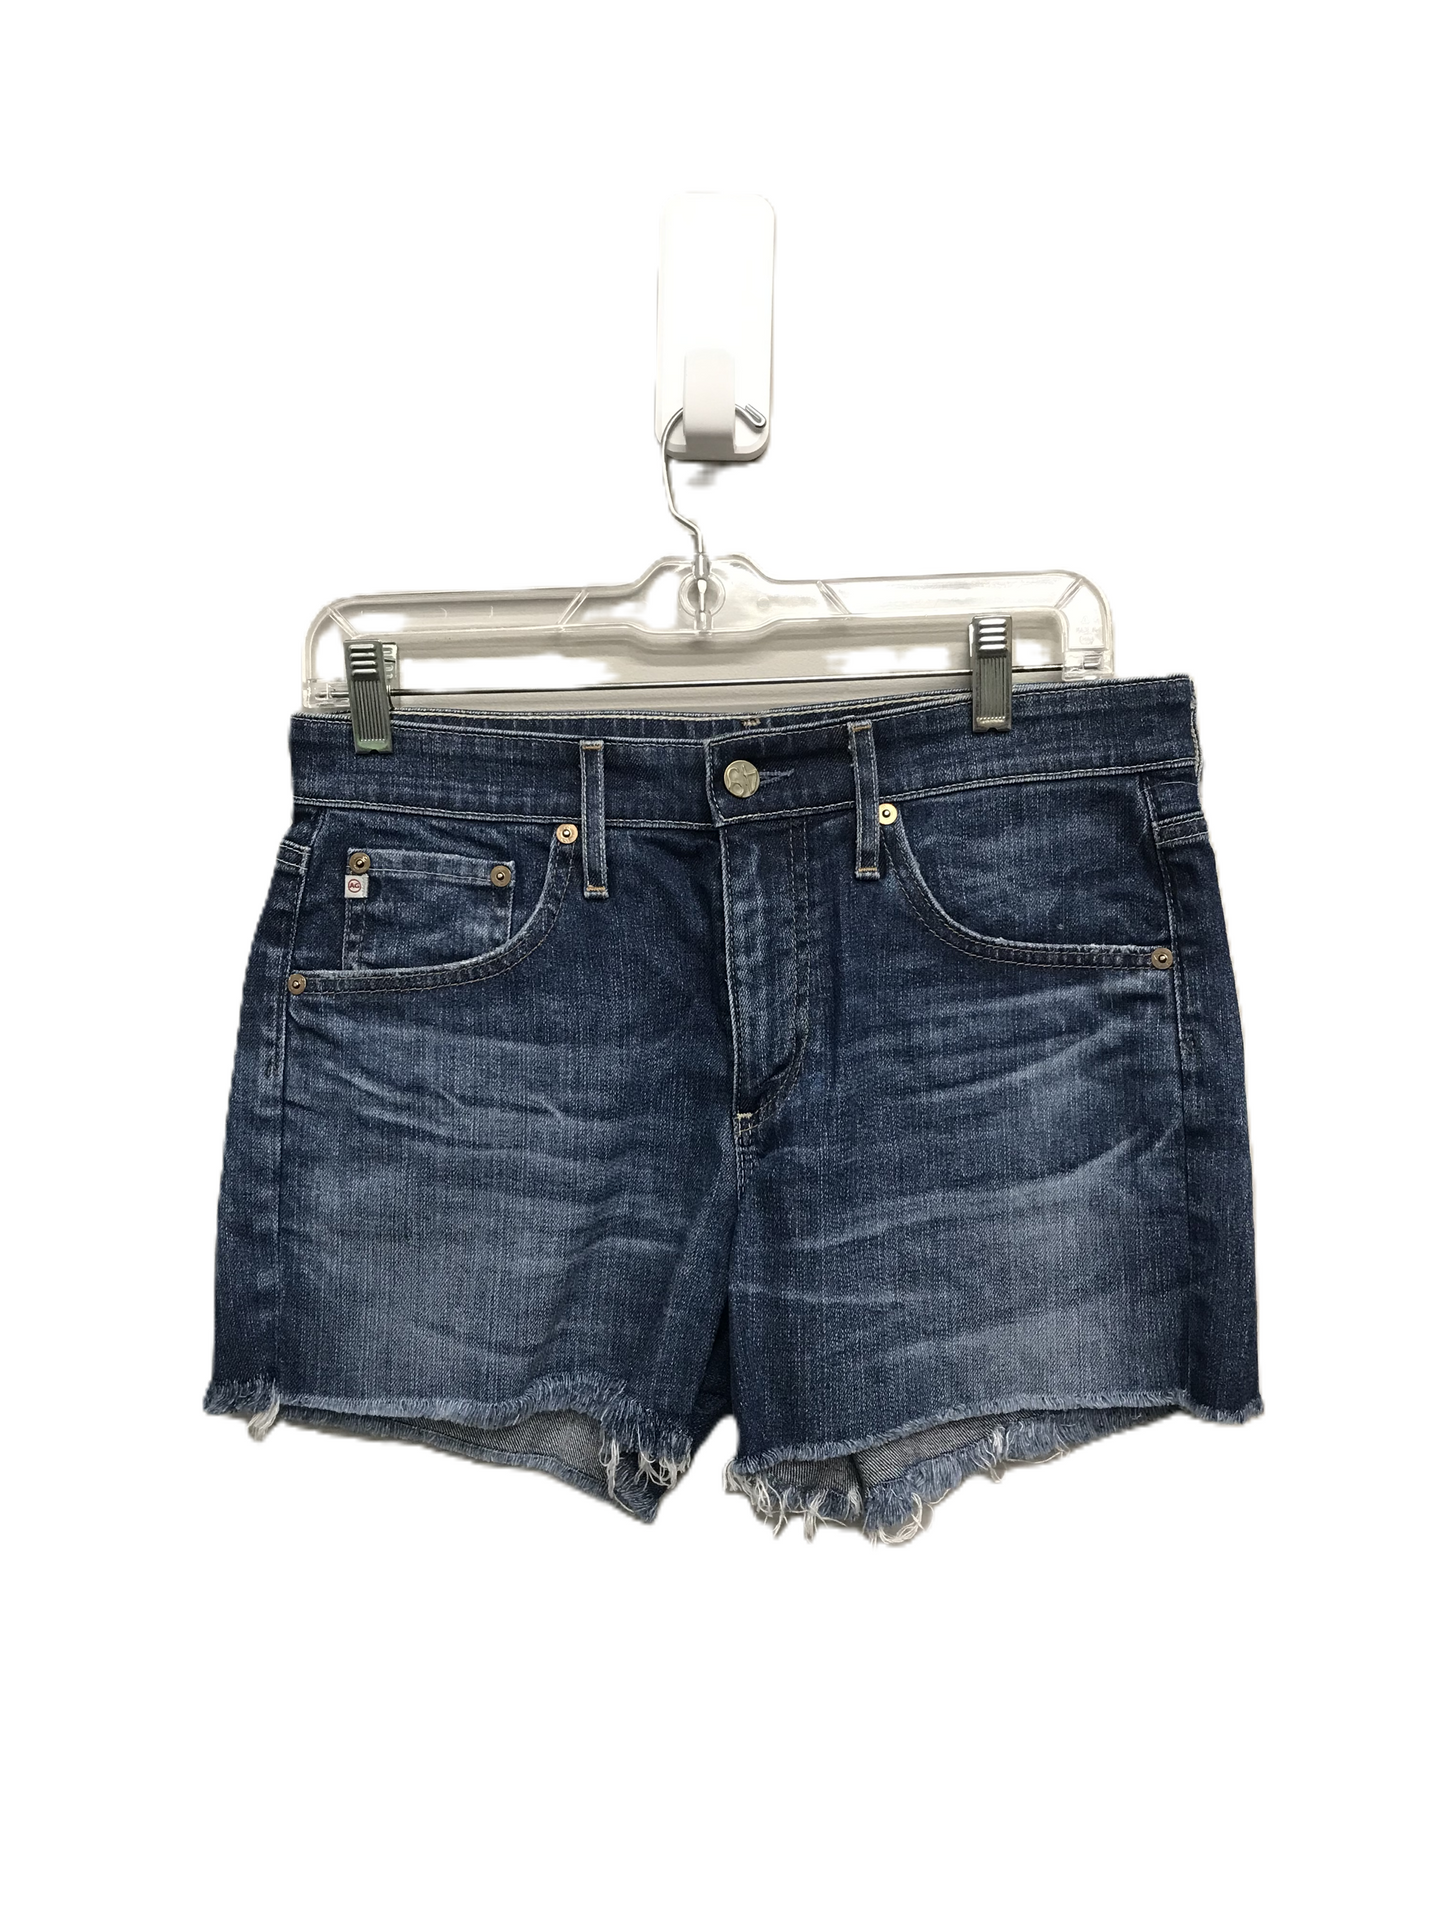 Shorts Designer By Adriano Goldschmied  Size: 2